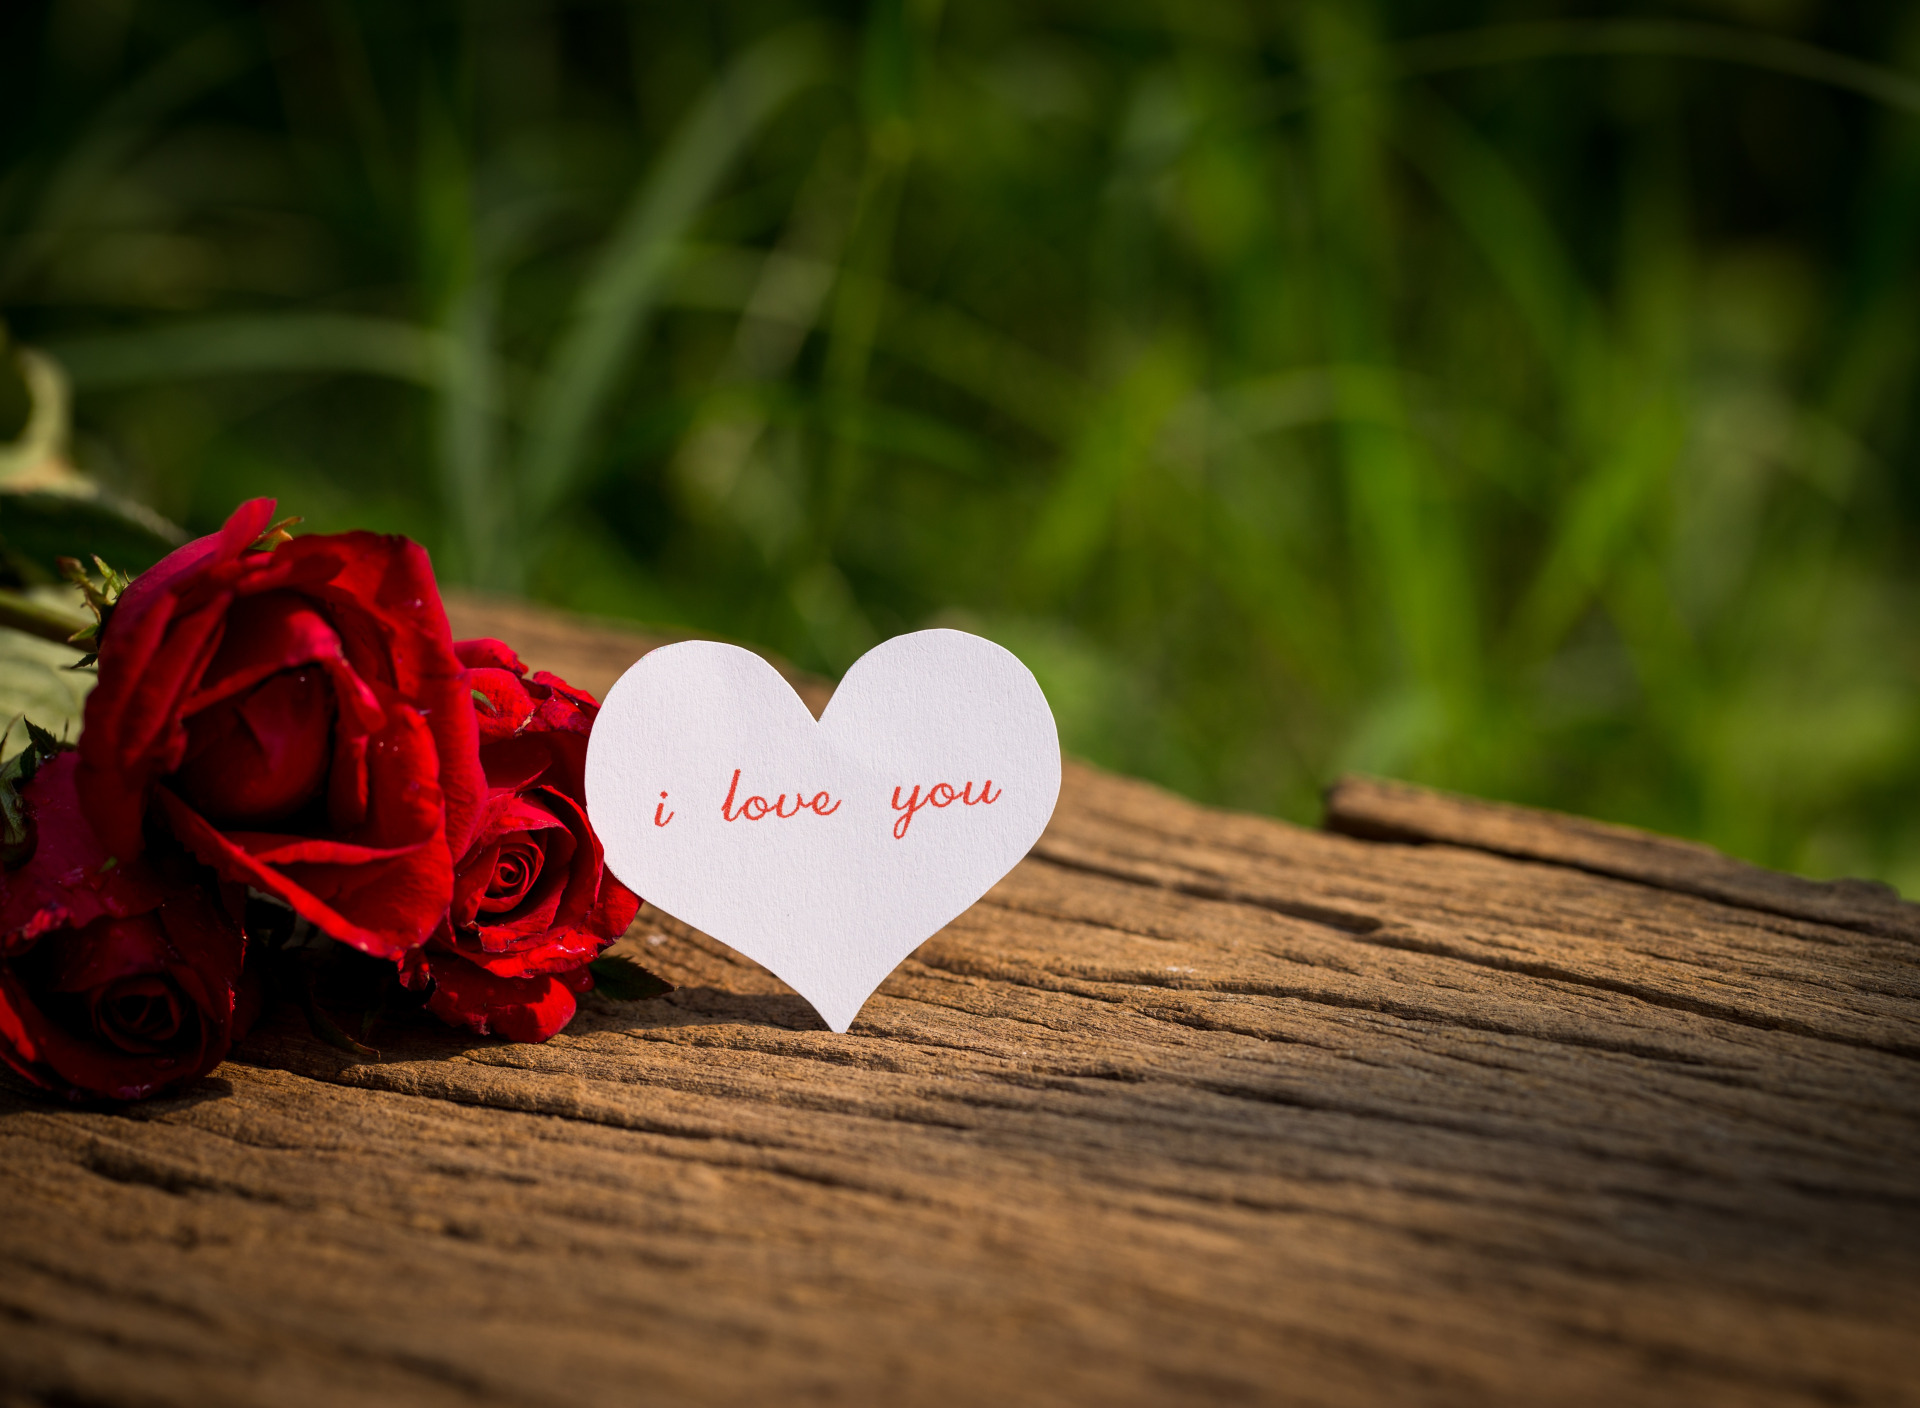 Download wallpaper love, flowers, heart, roses, red, love, i love you, heart, wood, flowers, romantic, valentine's day, roses, section flowers in resolution 1920x1408